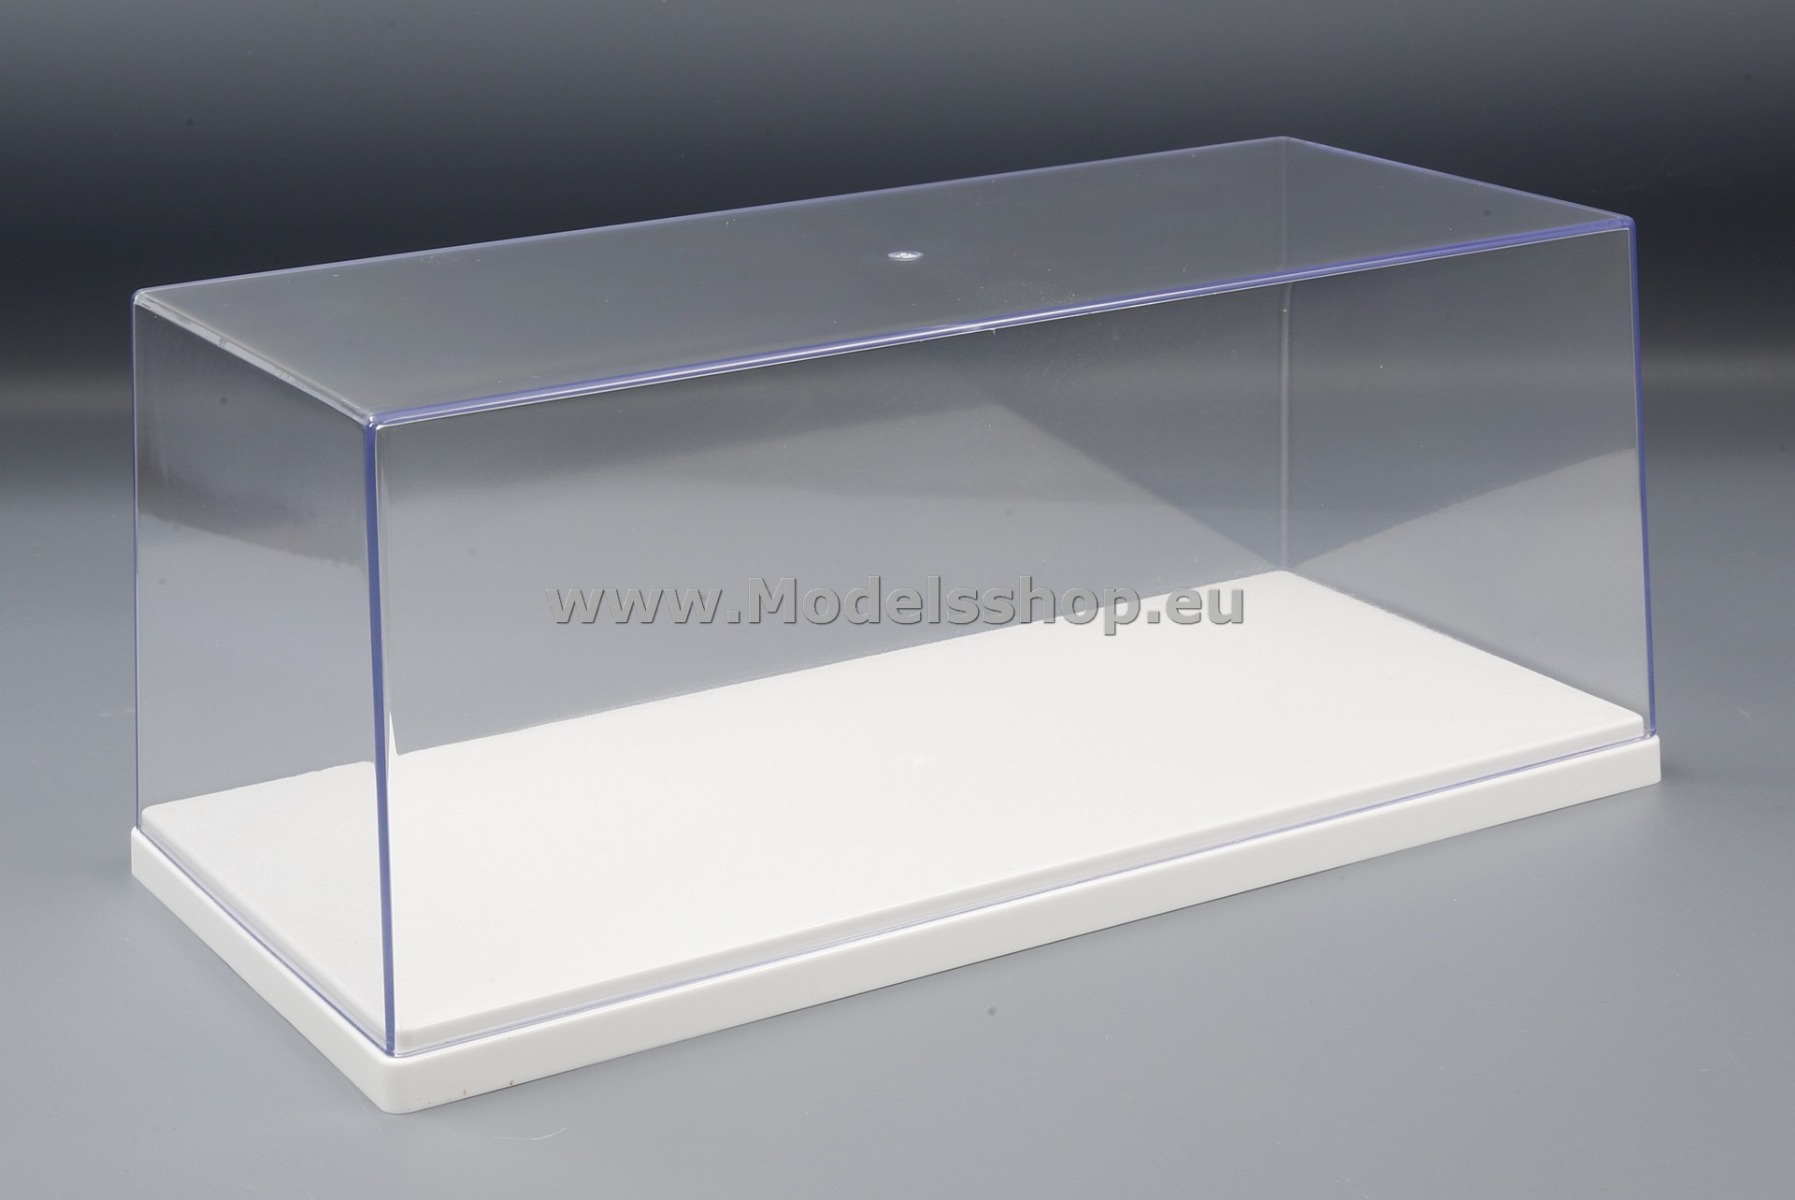 Display case / box for 1/24 model  (L/W/H in mm) 270 x 125 x 112. White base